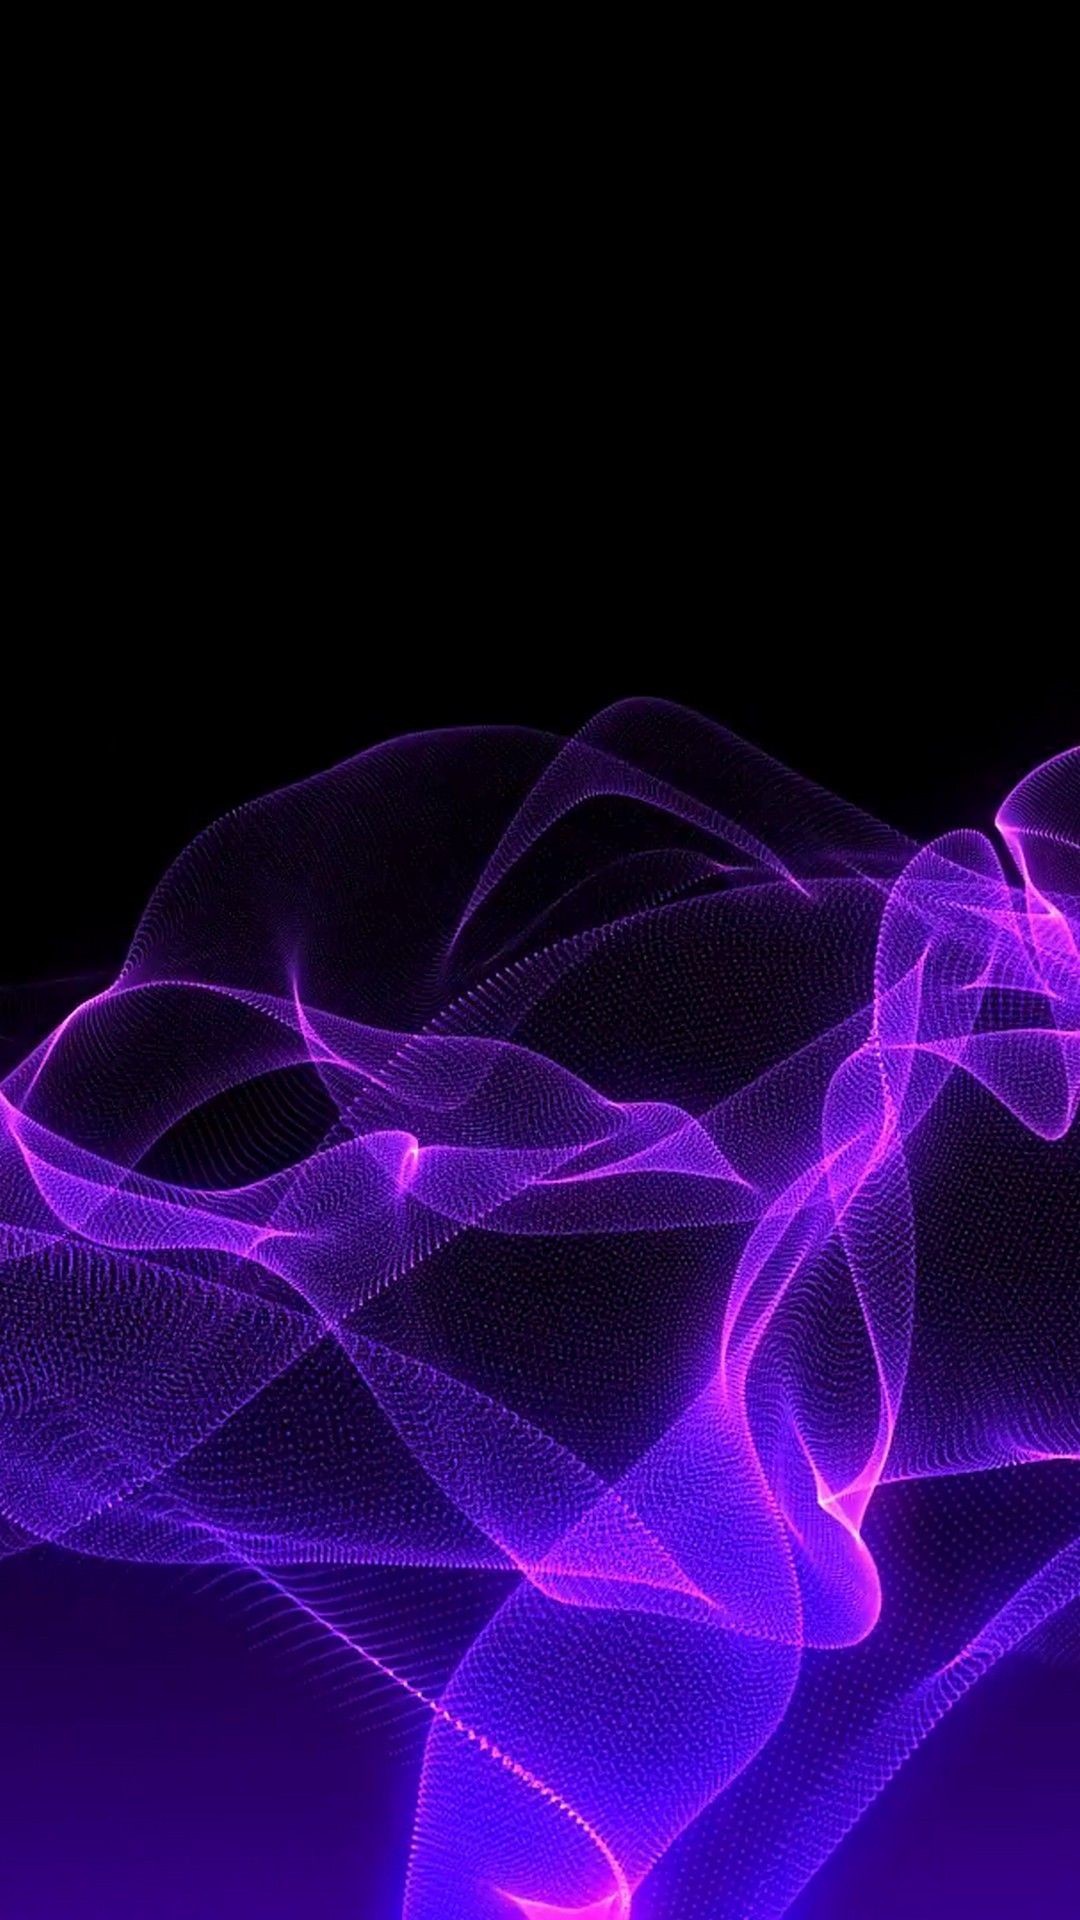 Download Black And Purple Wallpaper Hd Backgrounds Download